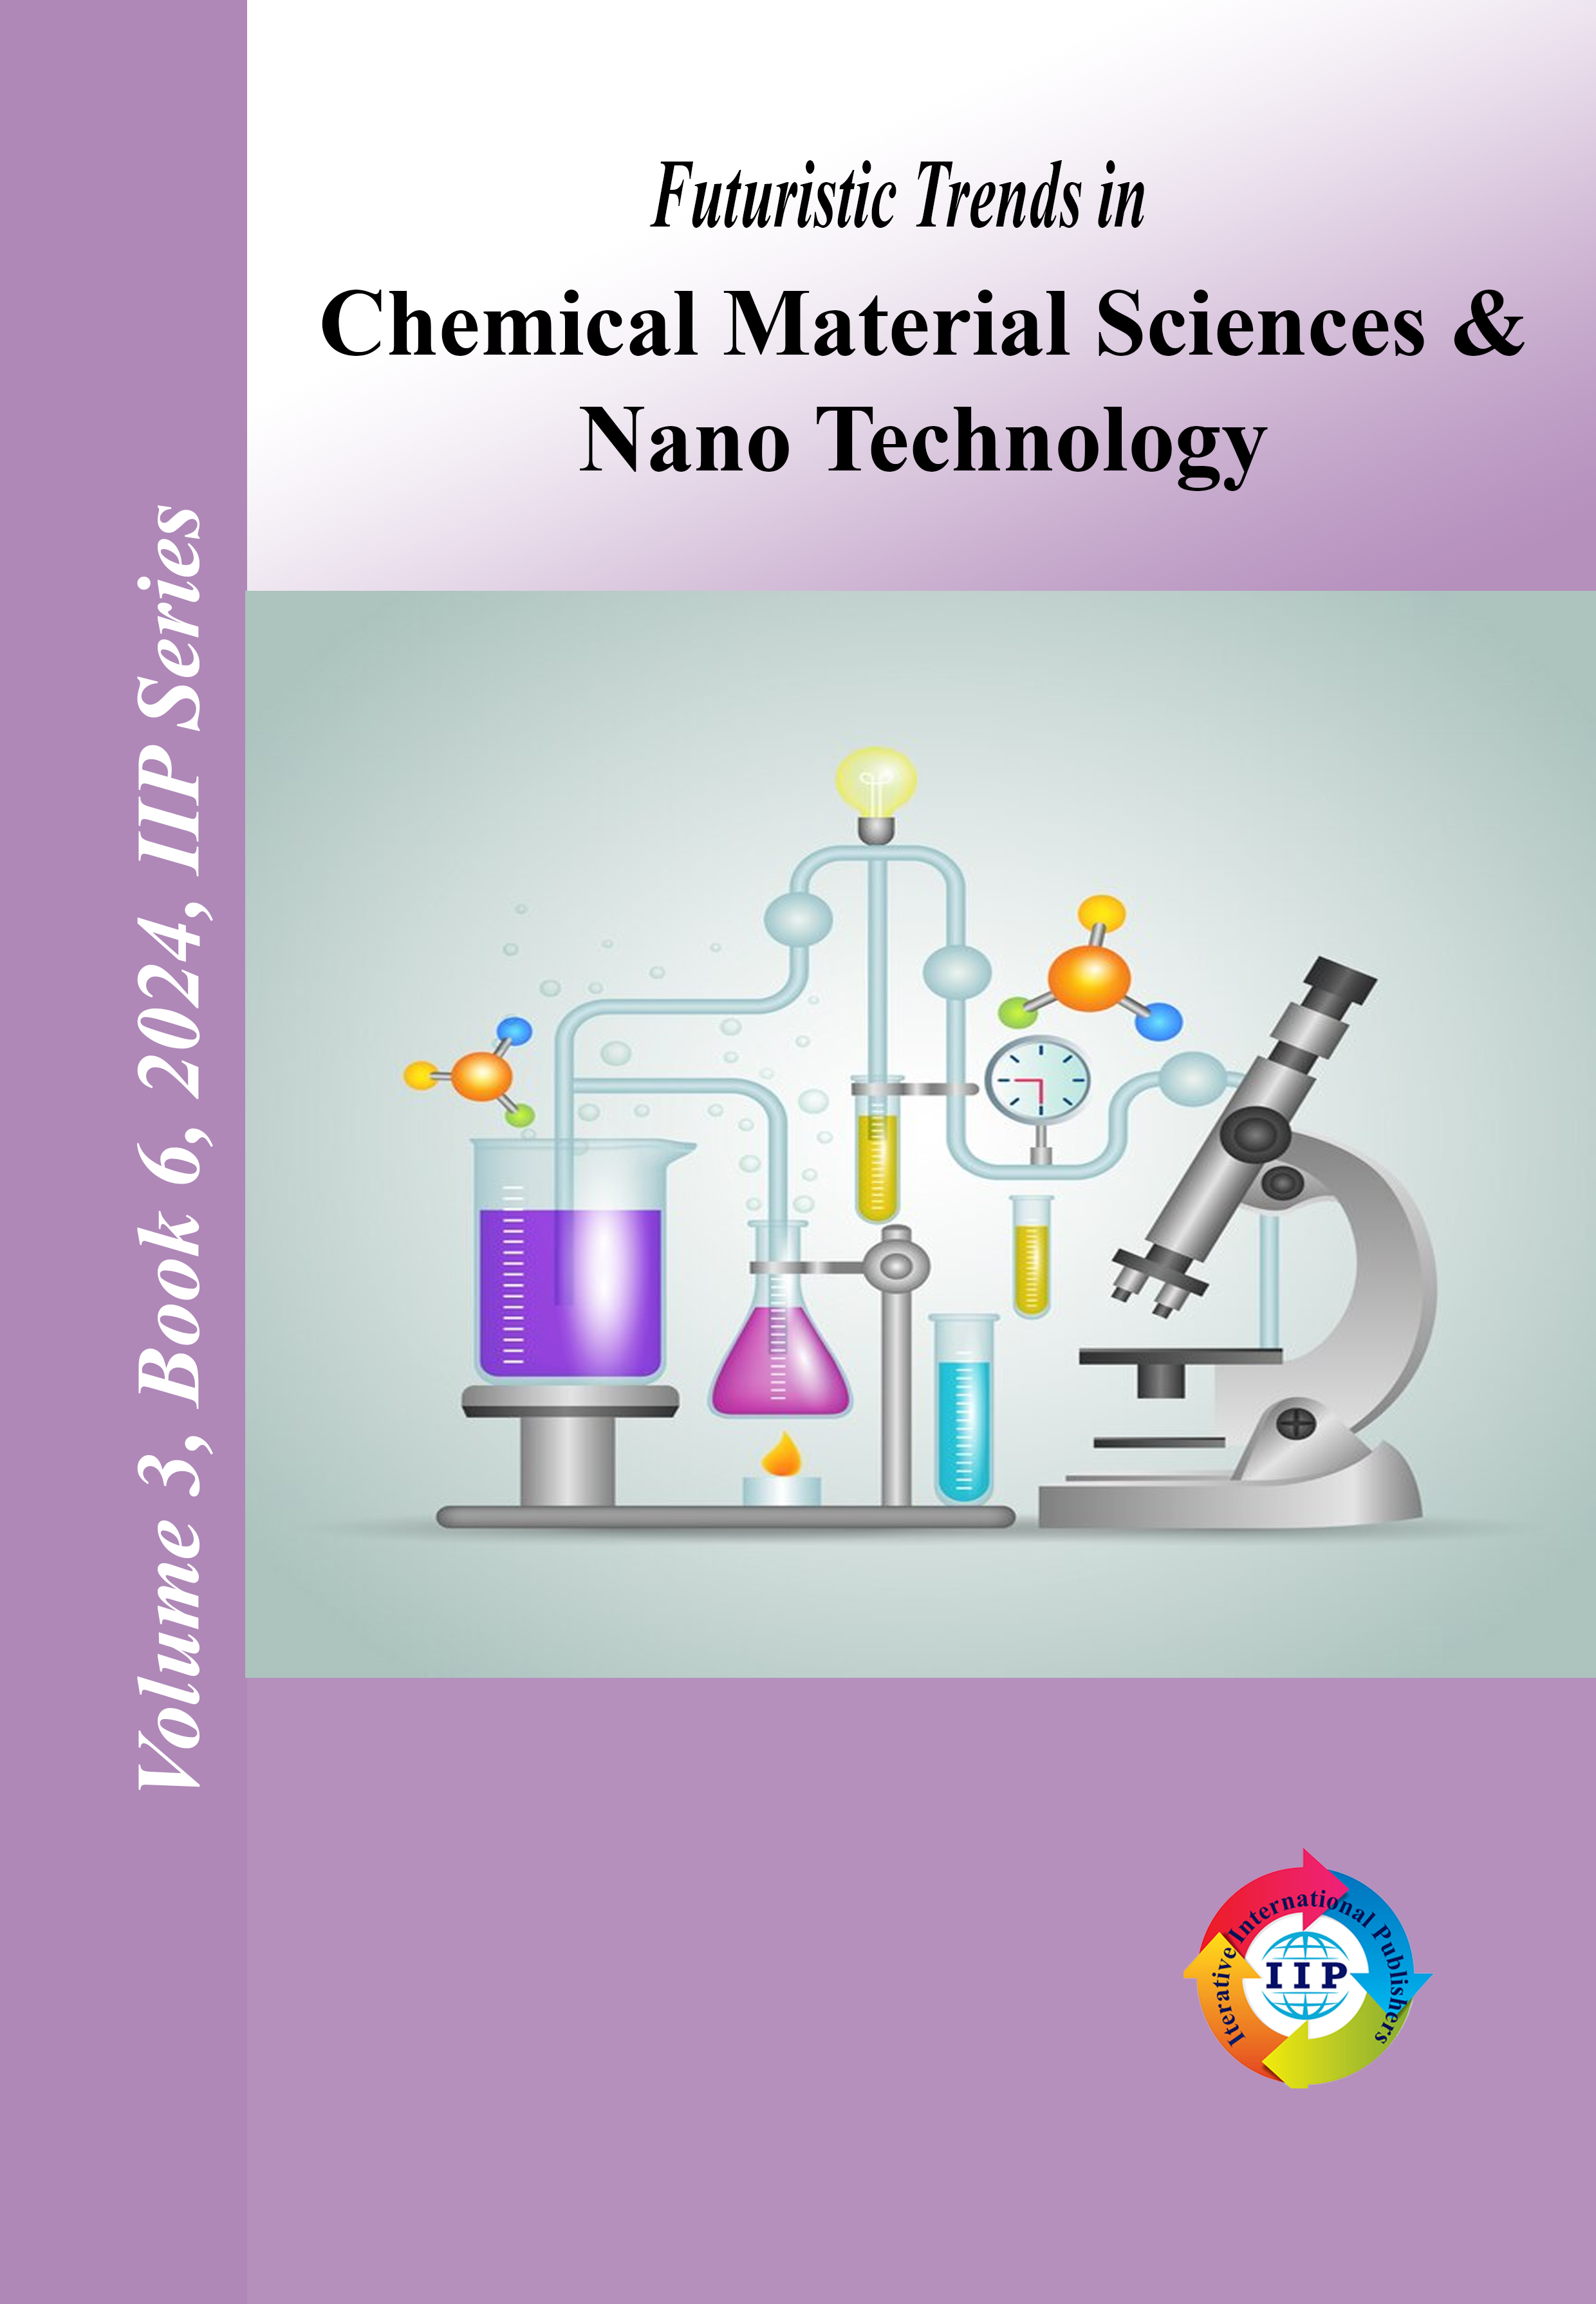 Futuristic Trends in Chemical Material Sciences & Nano Technology Volume 3 Book 6